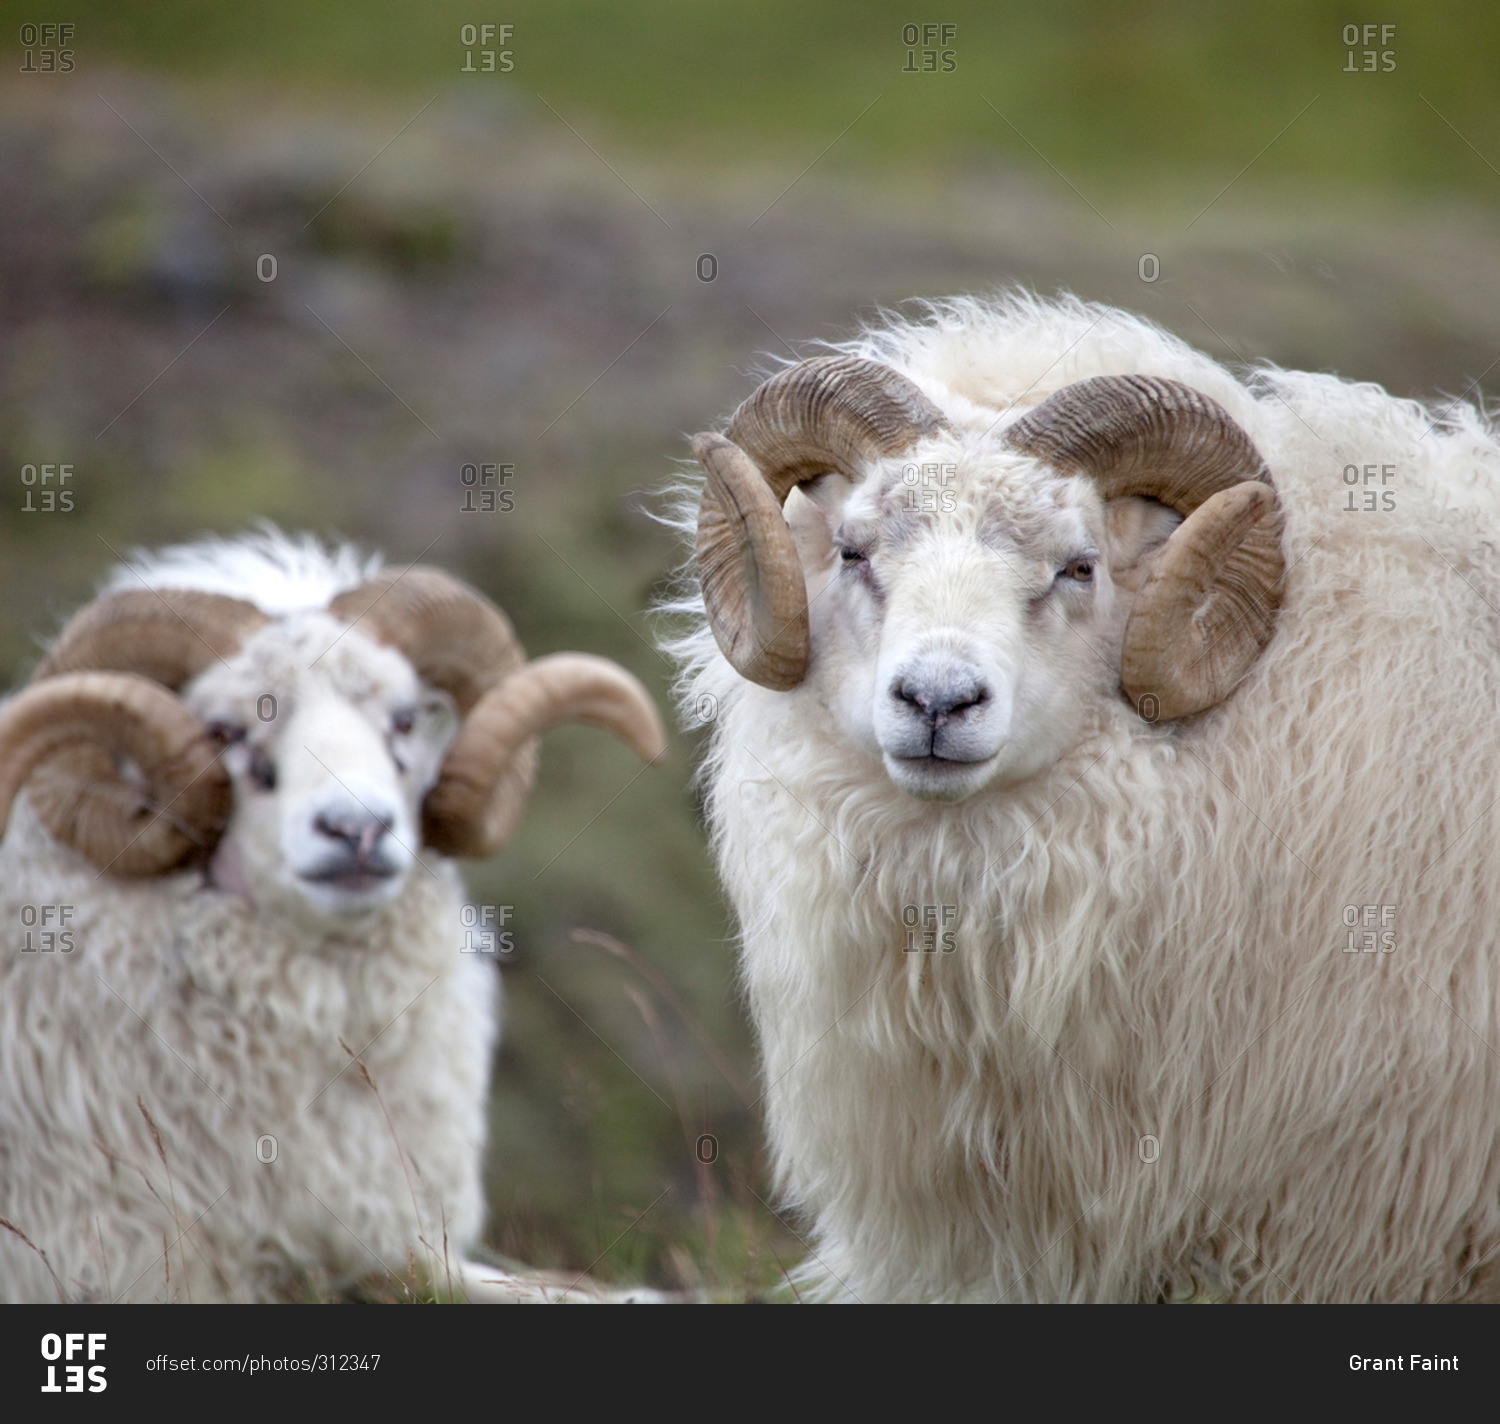 Two rams with curled horns stock photo - OFFSET